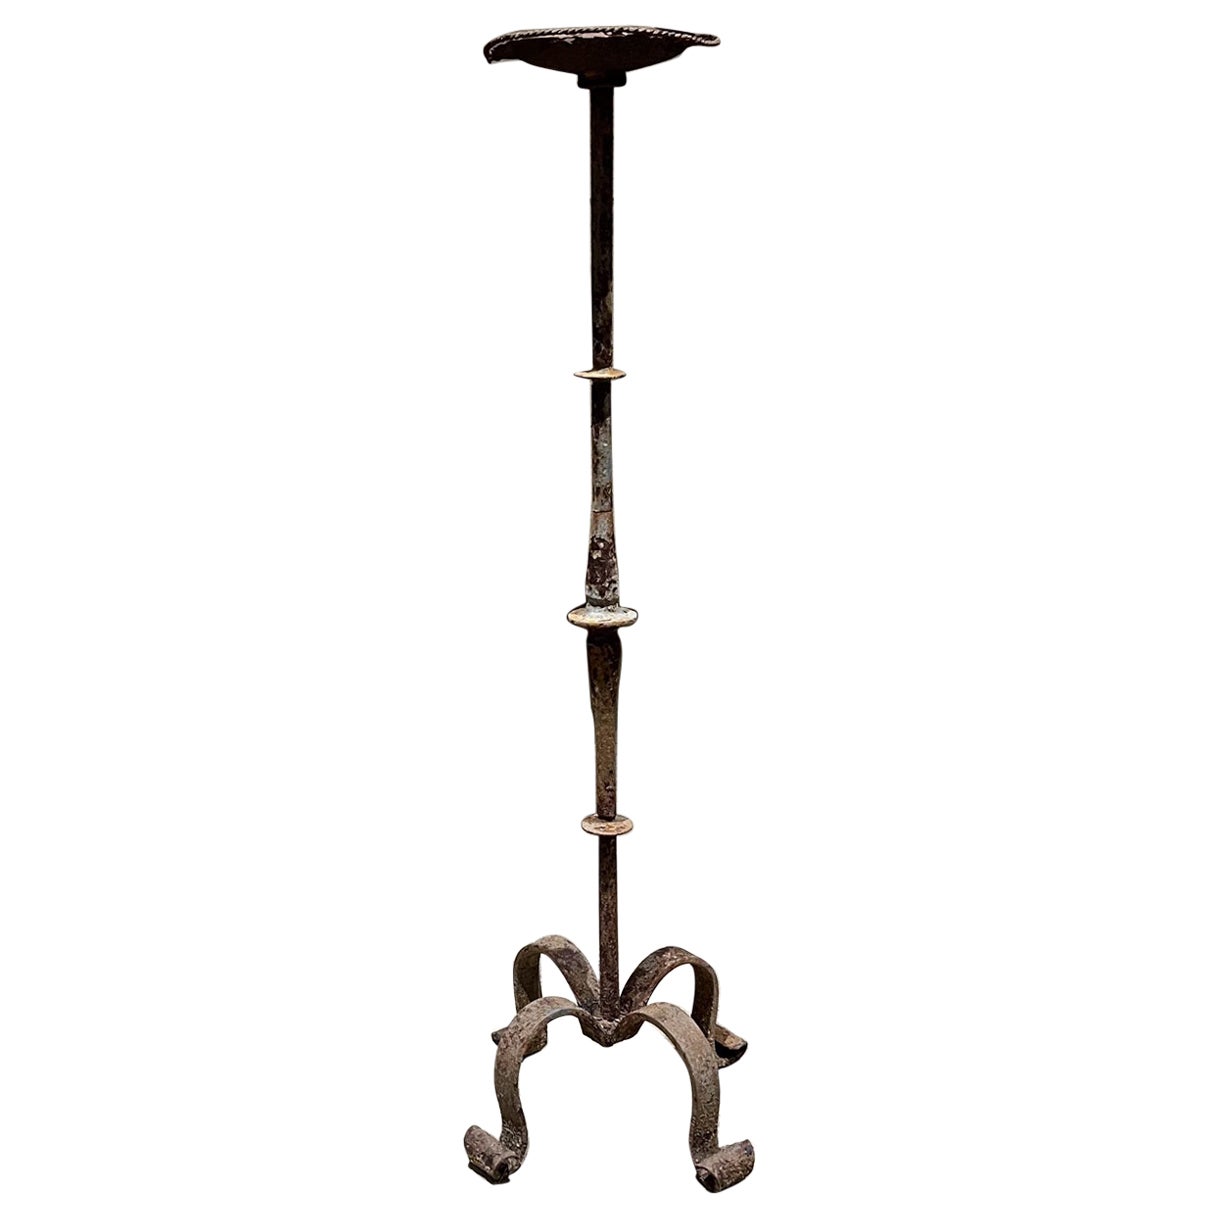 1940s Rustic Hand Forged Iron Standing Floor Candle Holder For Sale